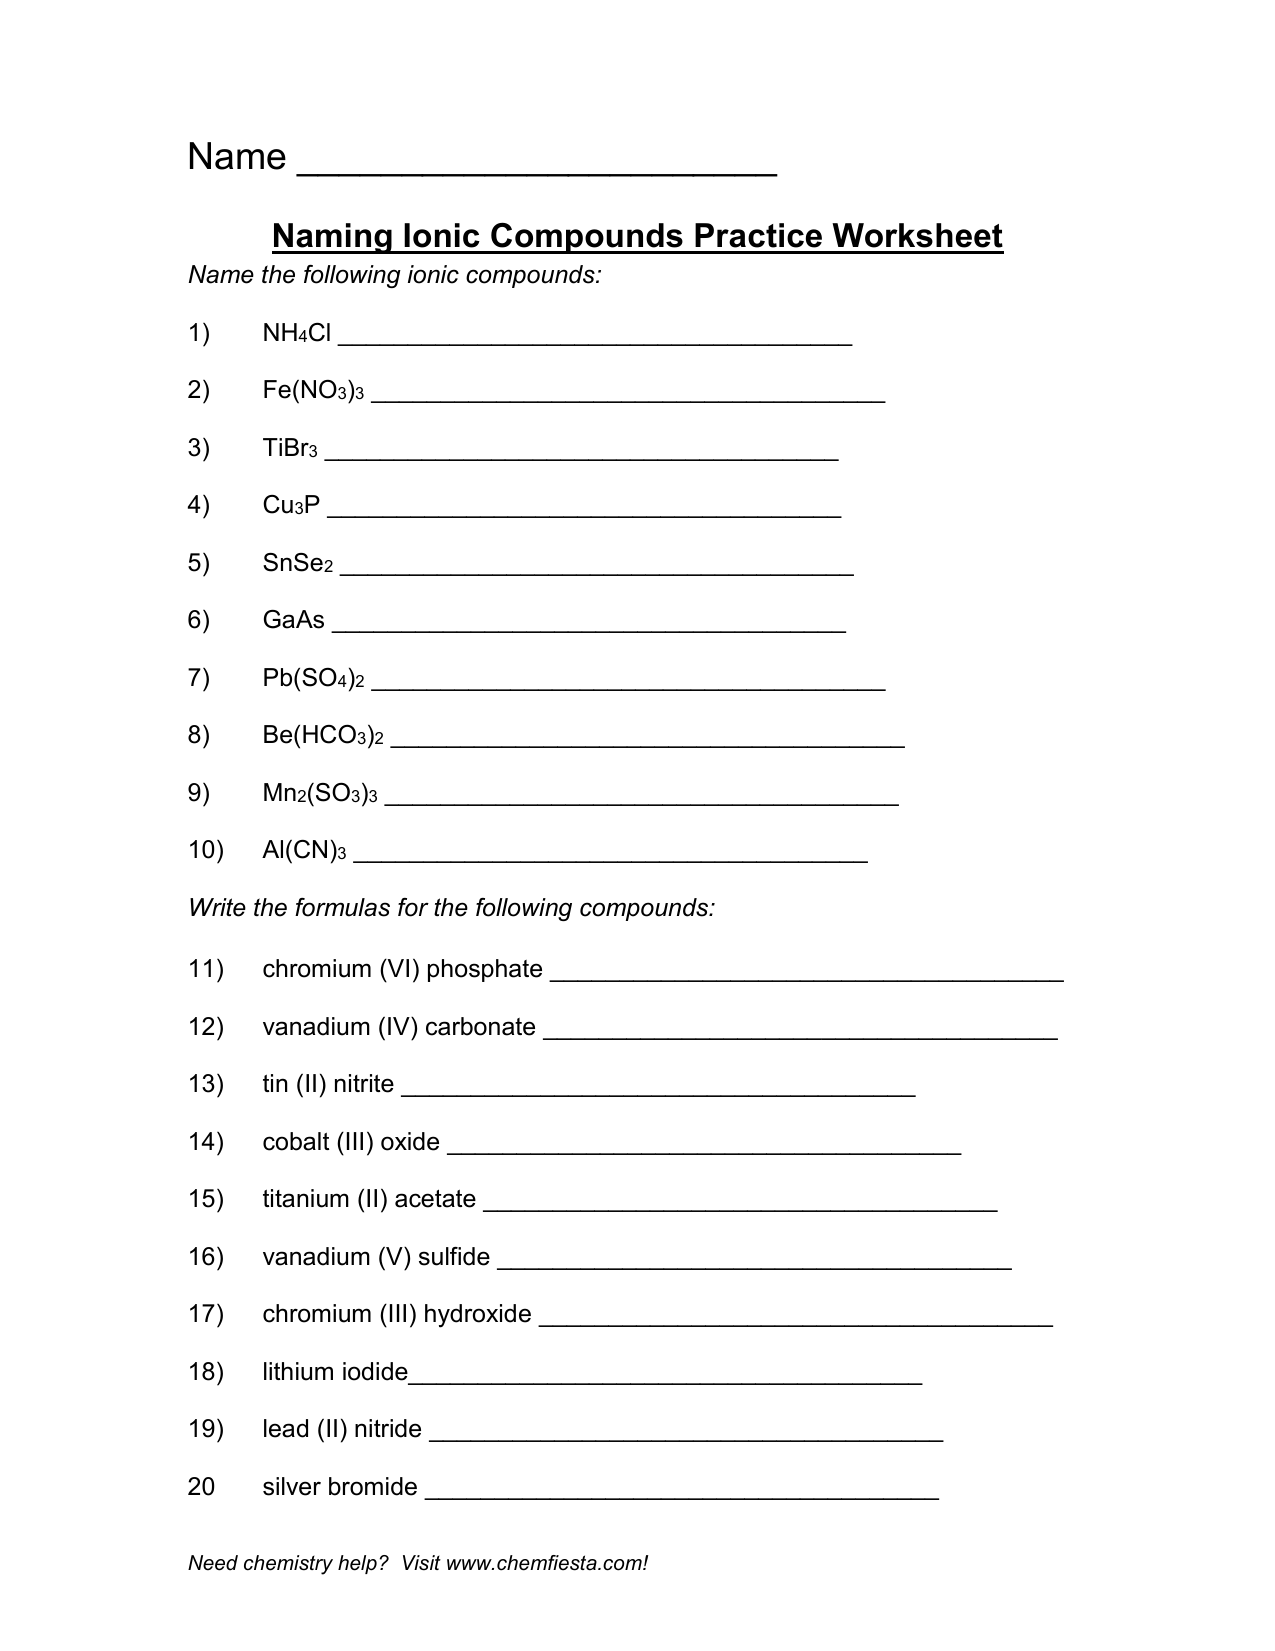 Mixed Ionic/Covalent Compound Naming With Regard To Naming Compounds Practice Worksheet